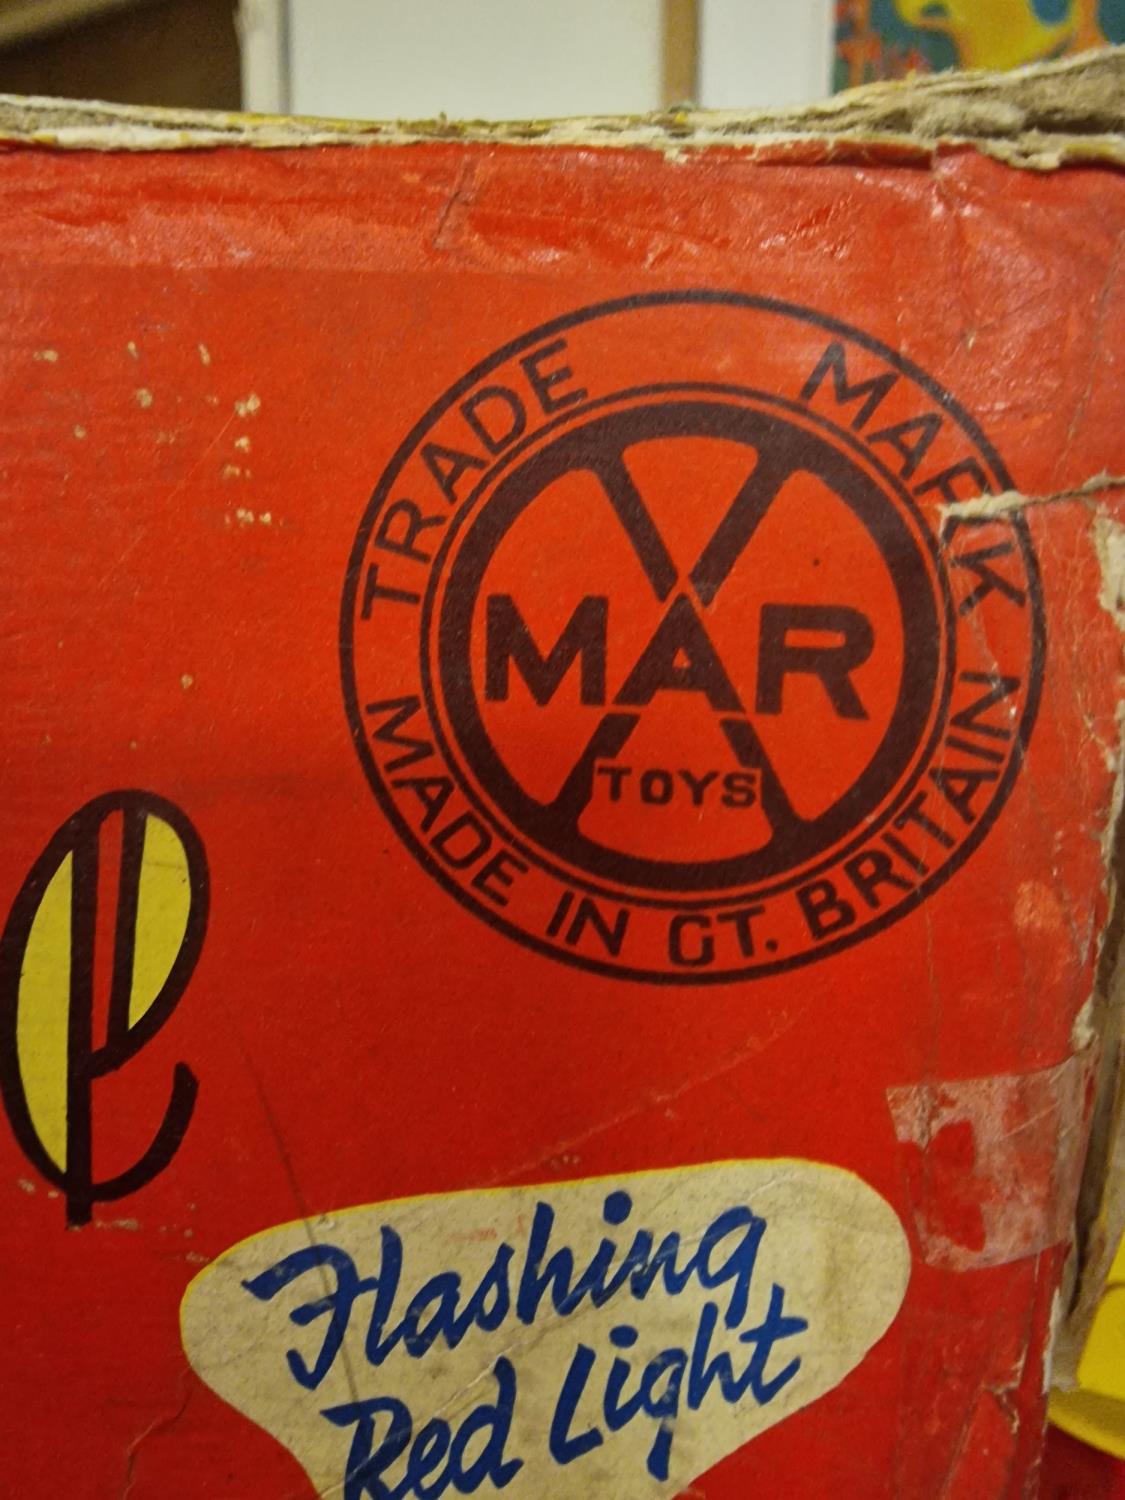 Louis Marx Boxed Deluxe Truck Fire Engine Vintage Toy - Image 3 of 3